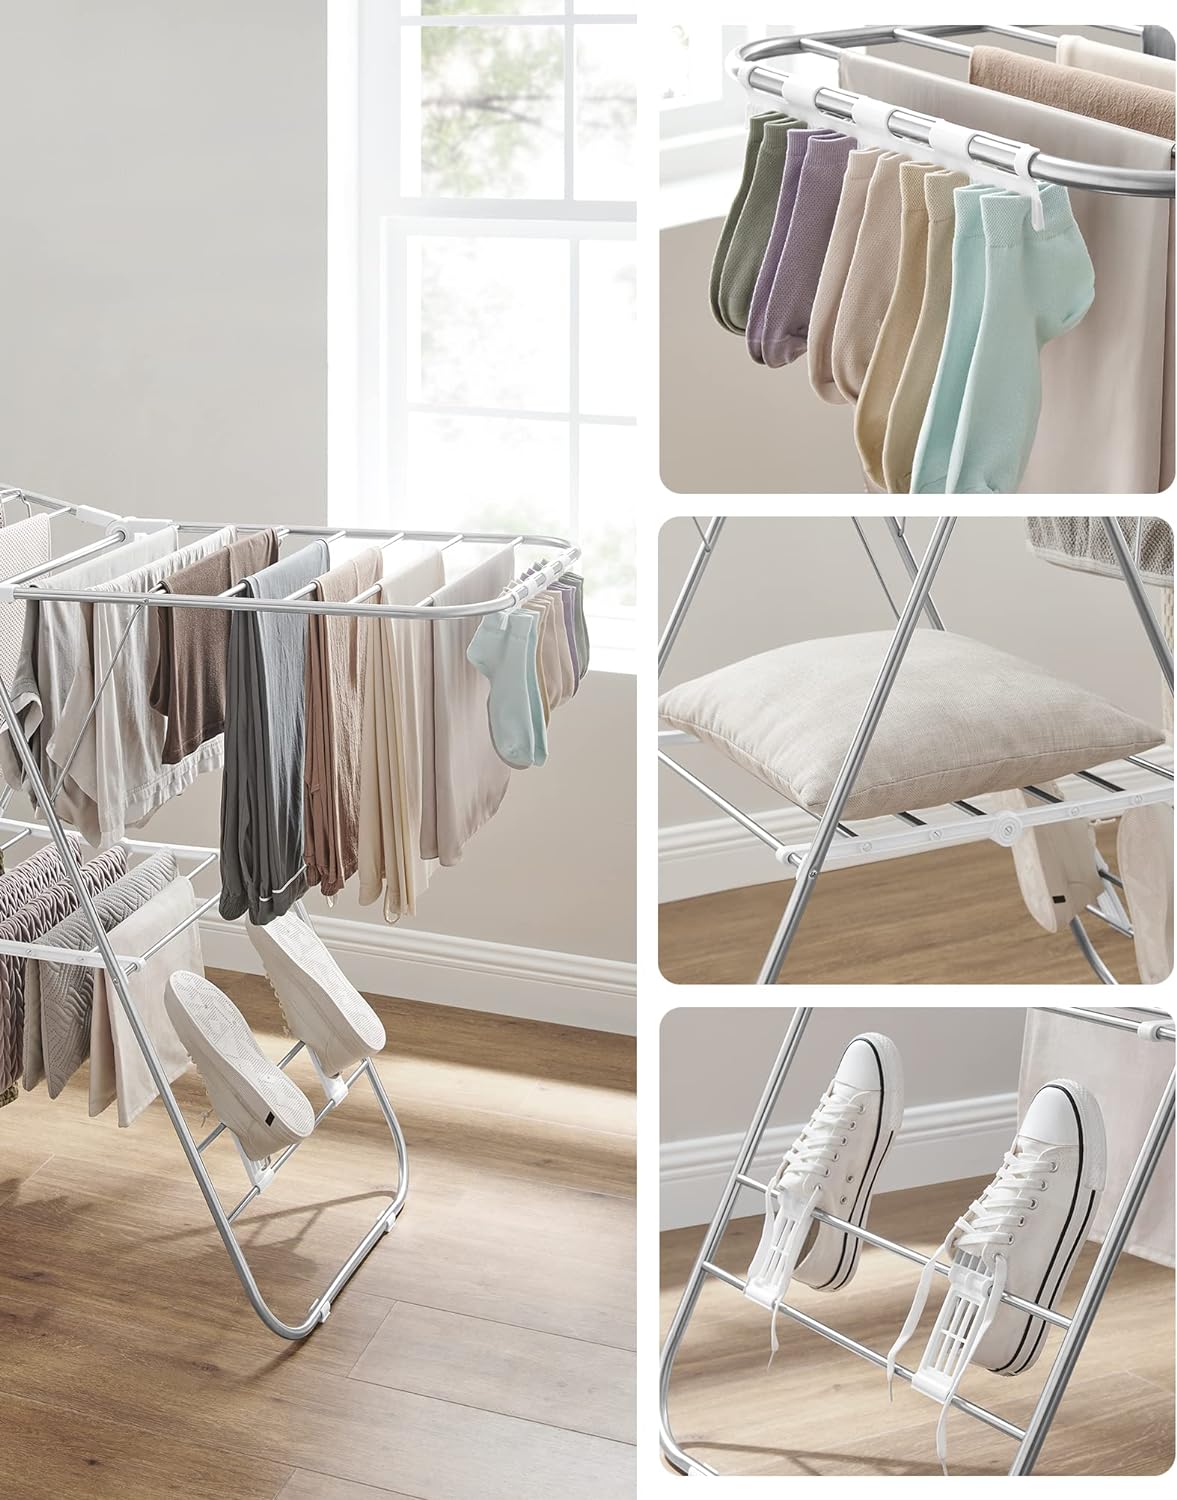 SONGMICS Foldable Clothes Drying Rack with Adjustable Wings Stainless Steel White and Silver